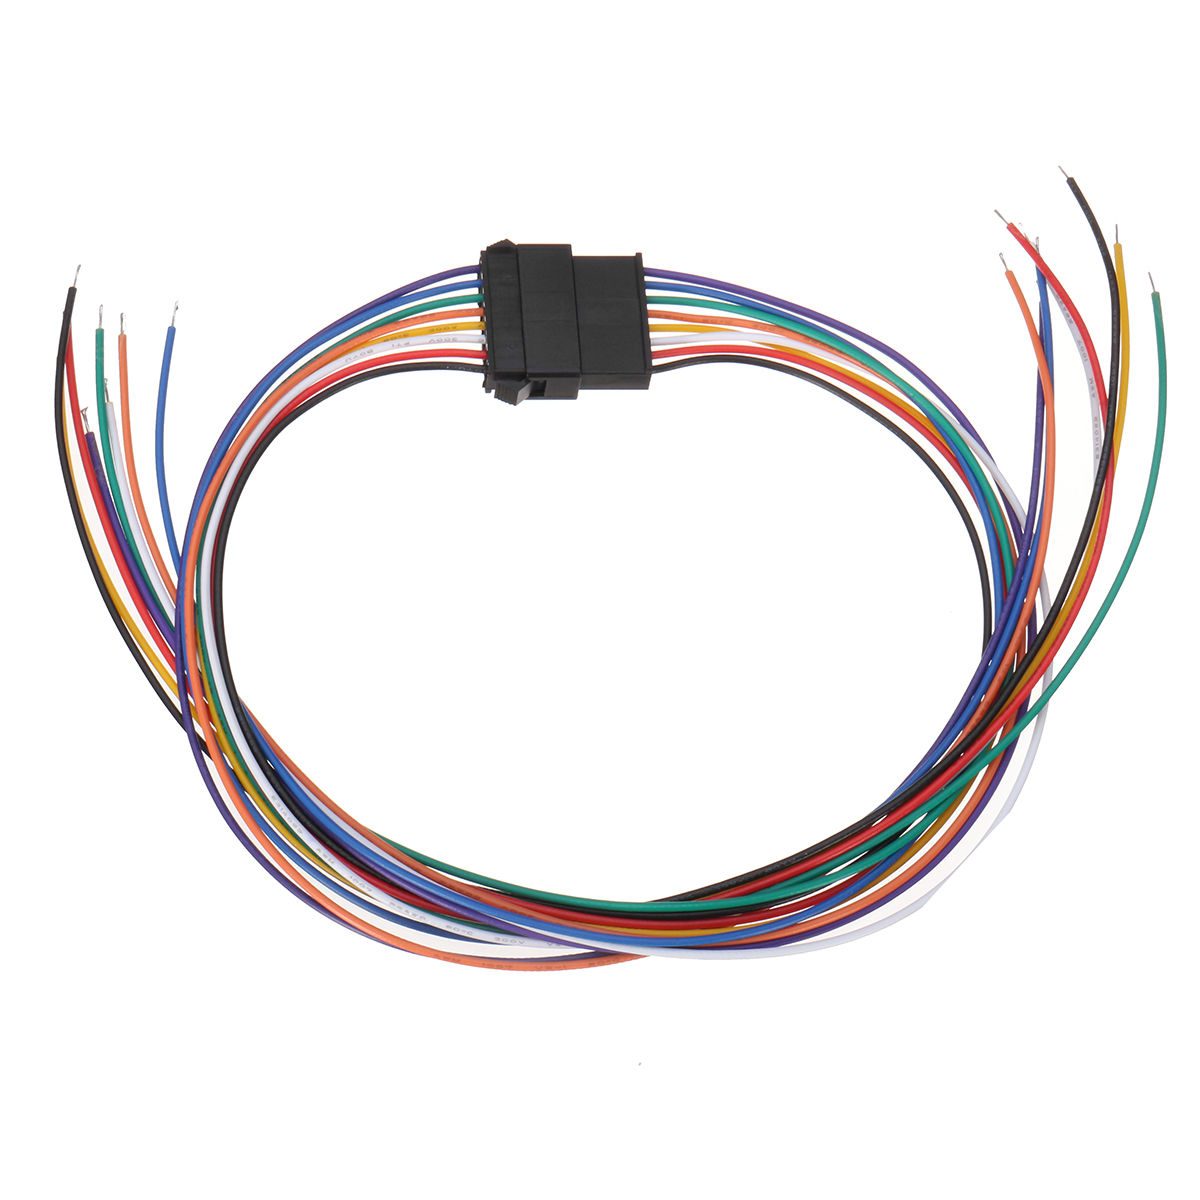 10-Set-Jst-25mm-SM-8-Pin-Male--Female-Connector-Plug-With-Wire-Cable-300mm-1170148-5